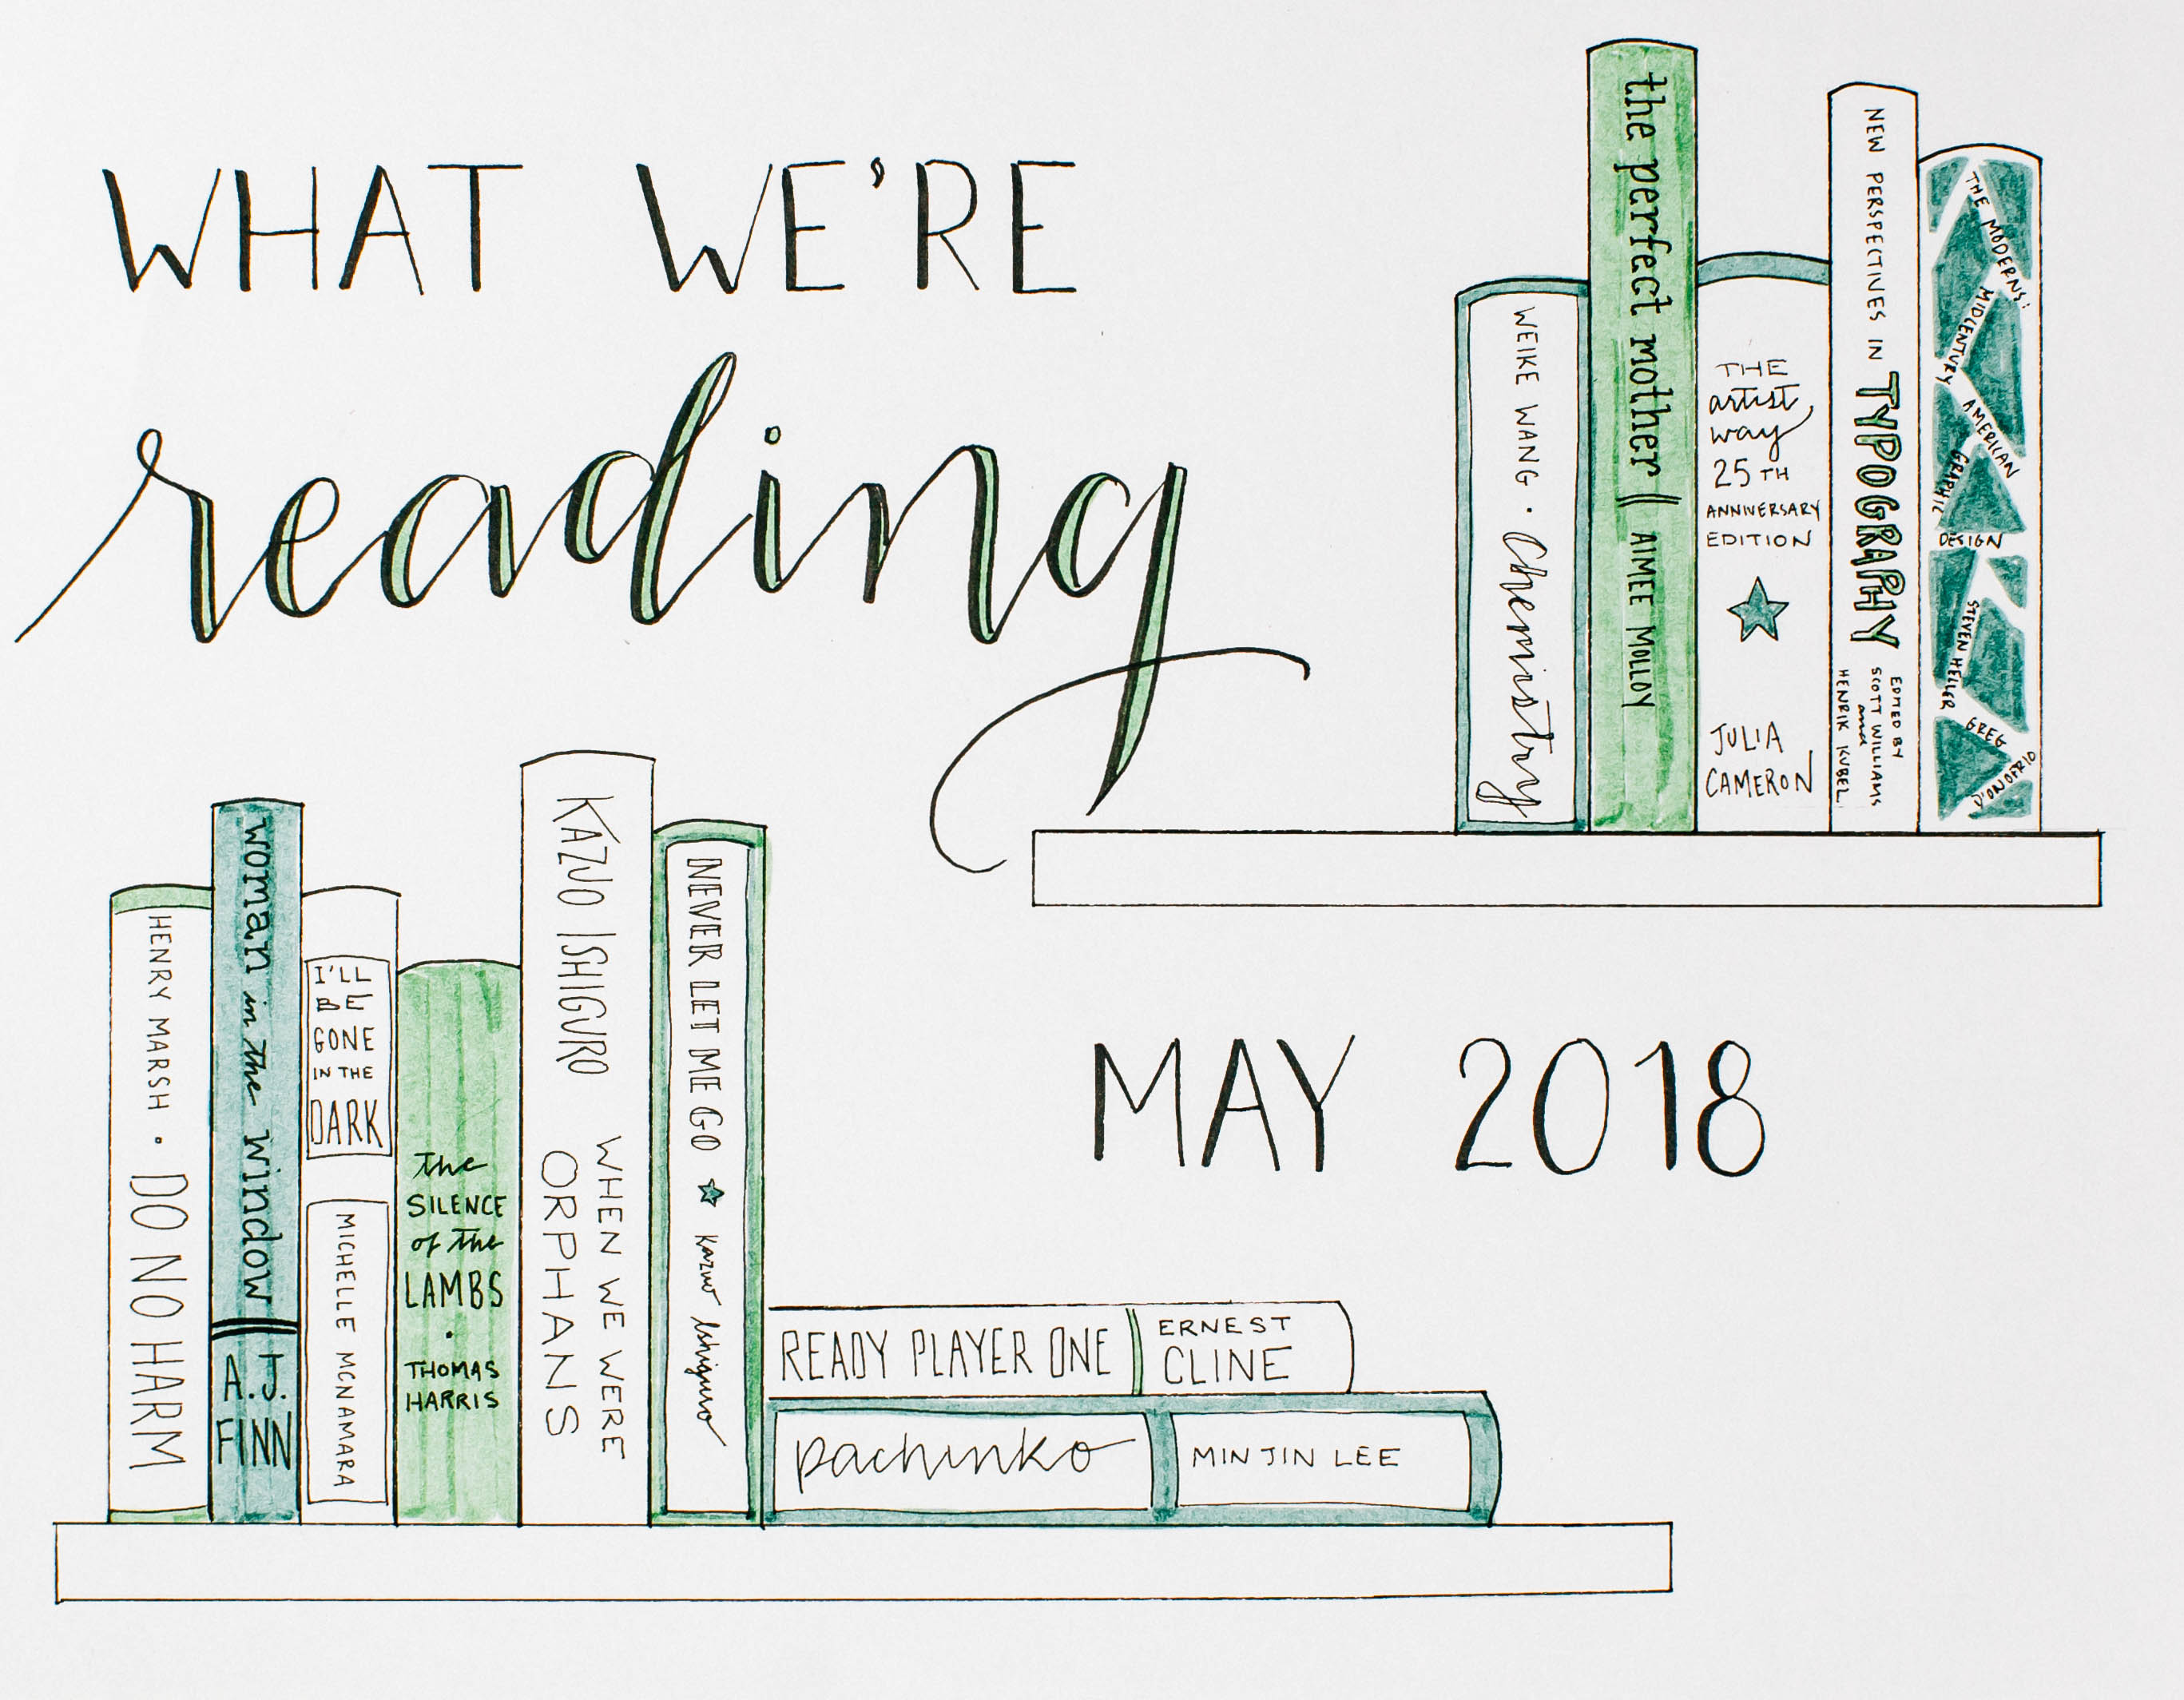 A colorful and creative drawing of a bookshelf displaying the titles and authors of books being read in may 2018, presented with an artistic header that states "what we're reading.